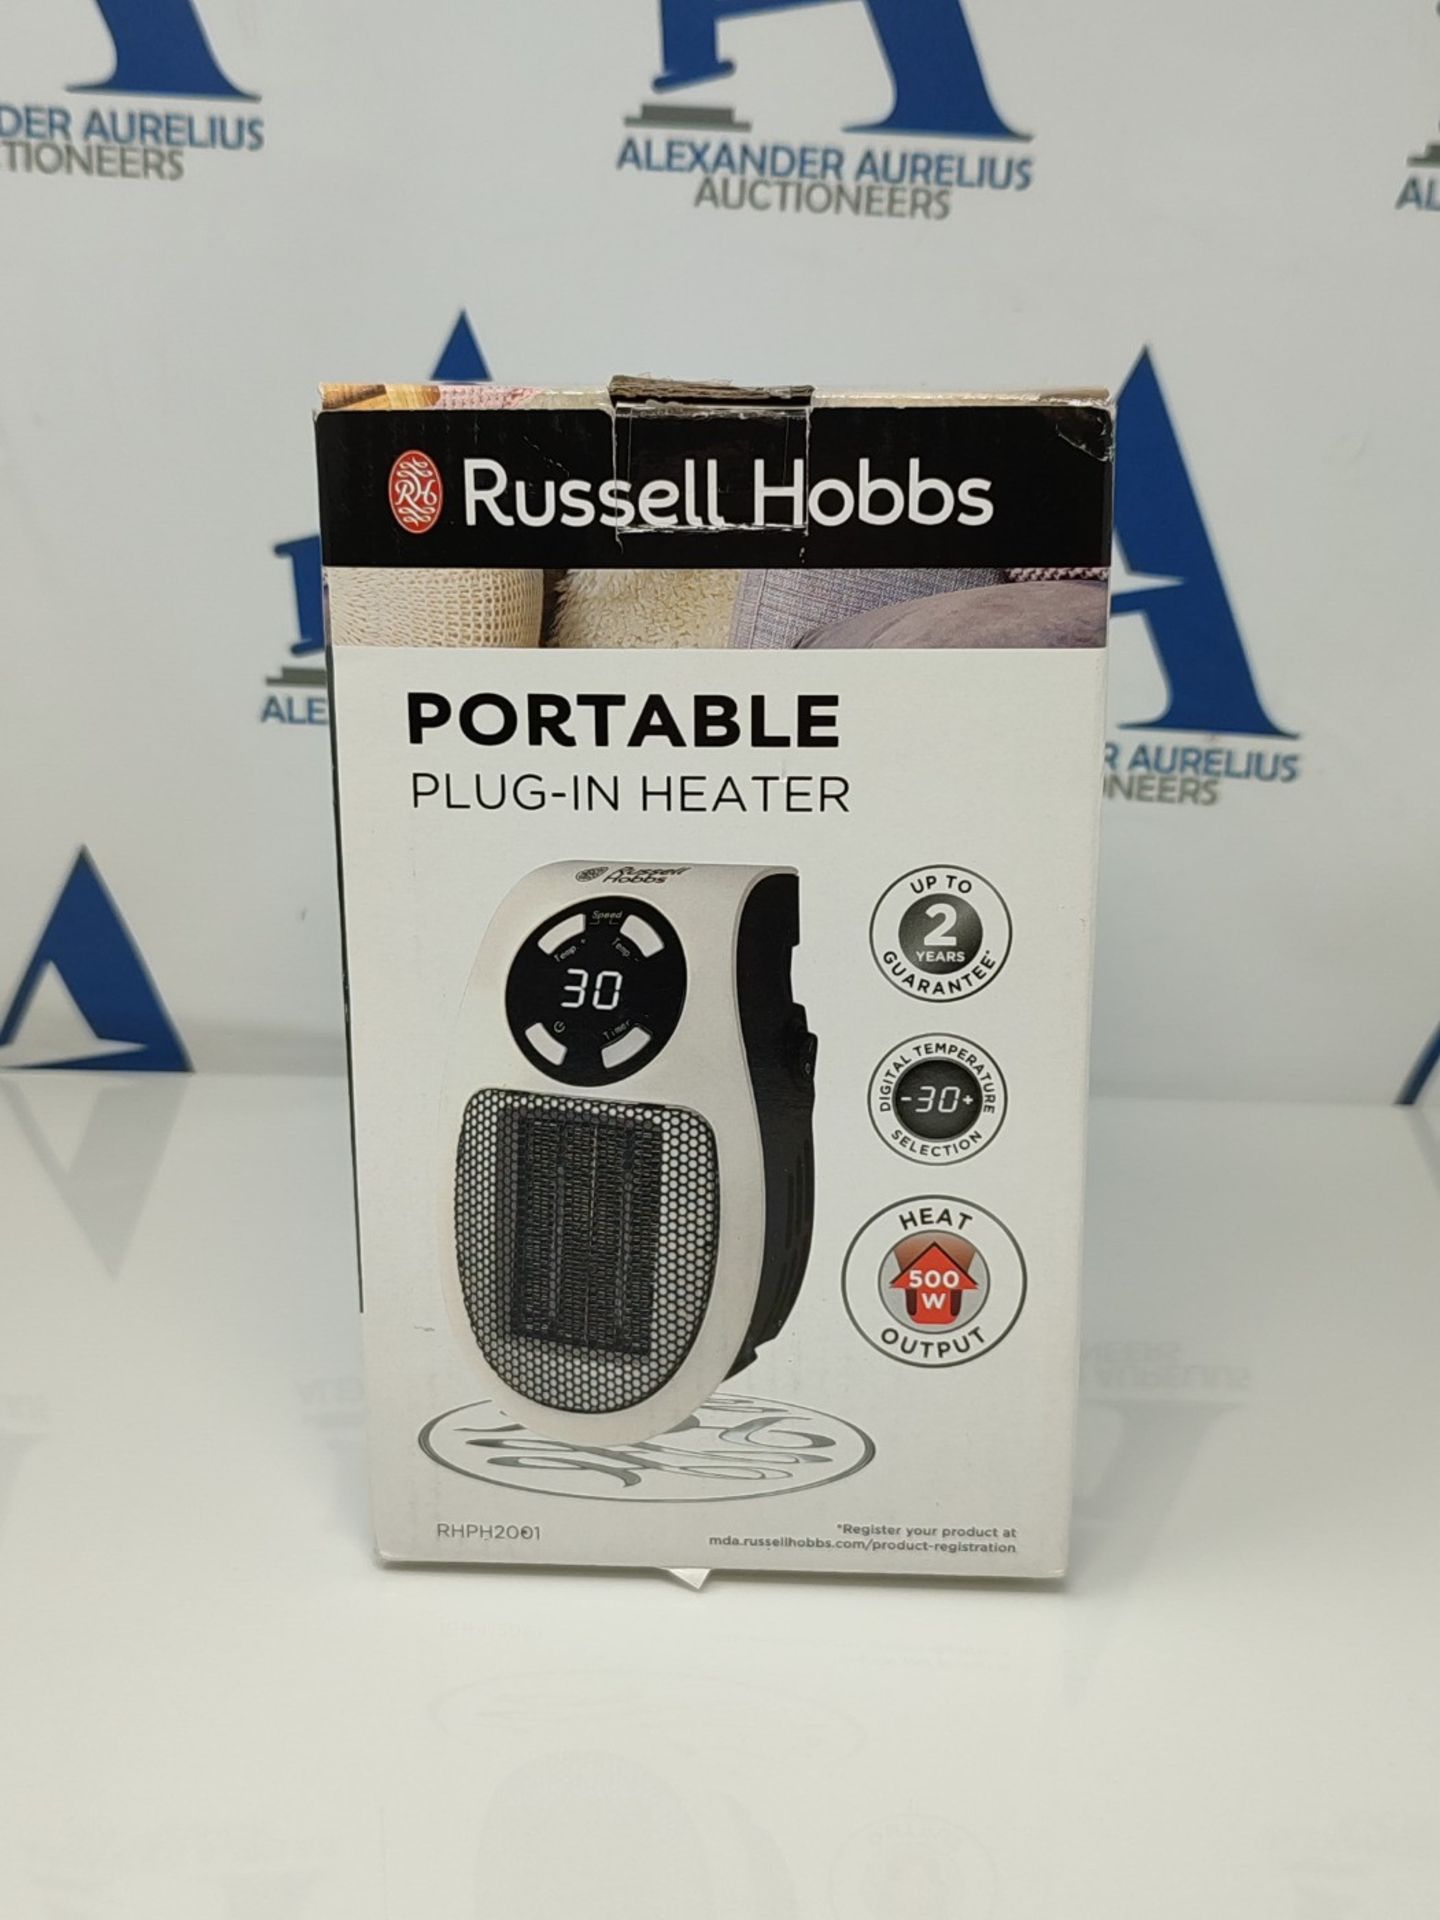 Russell Hobbs RHPH2001 500W Ceramic Plug Heater, Adjustable thermostat, 12 Hour Timer - Image 2 of 3